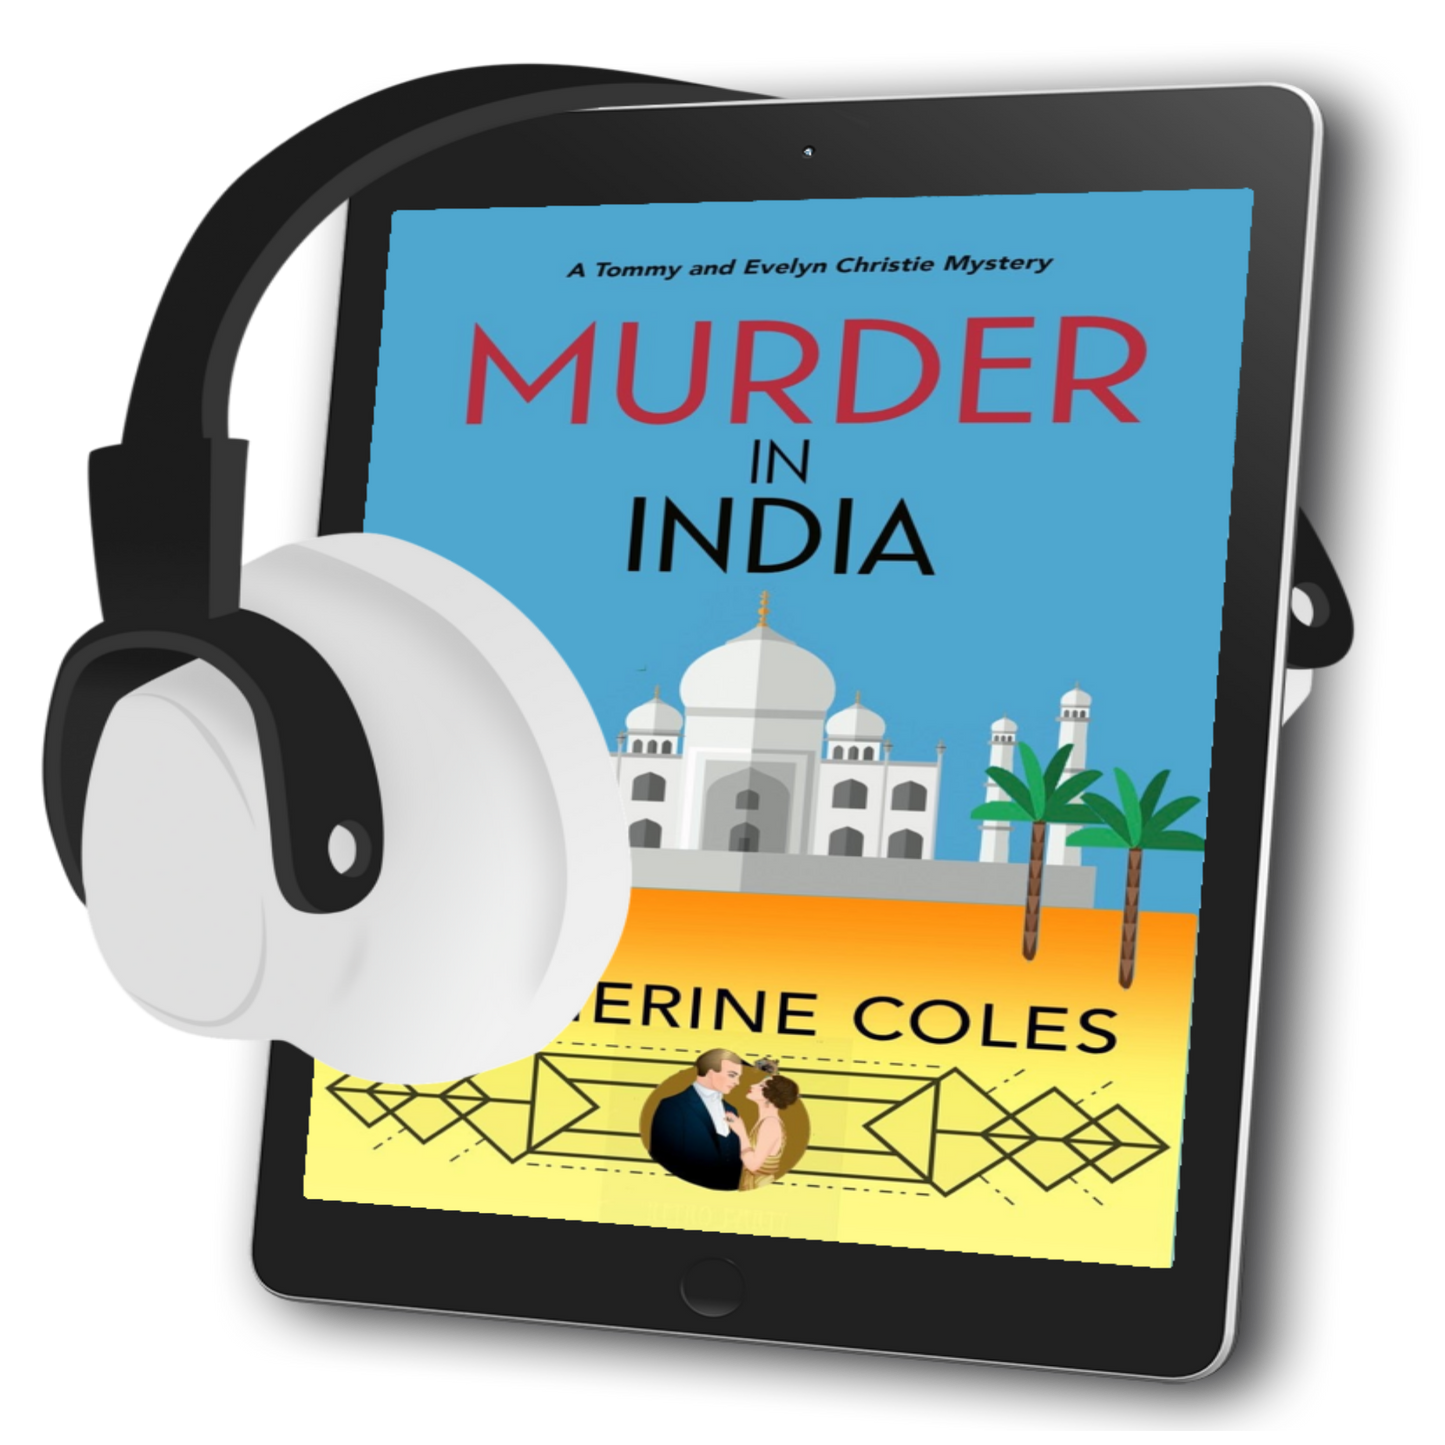 Murder in India - Pre-Order Audiobook (Tommy & Evelyn Book 7)